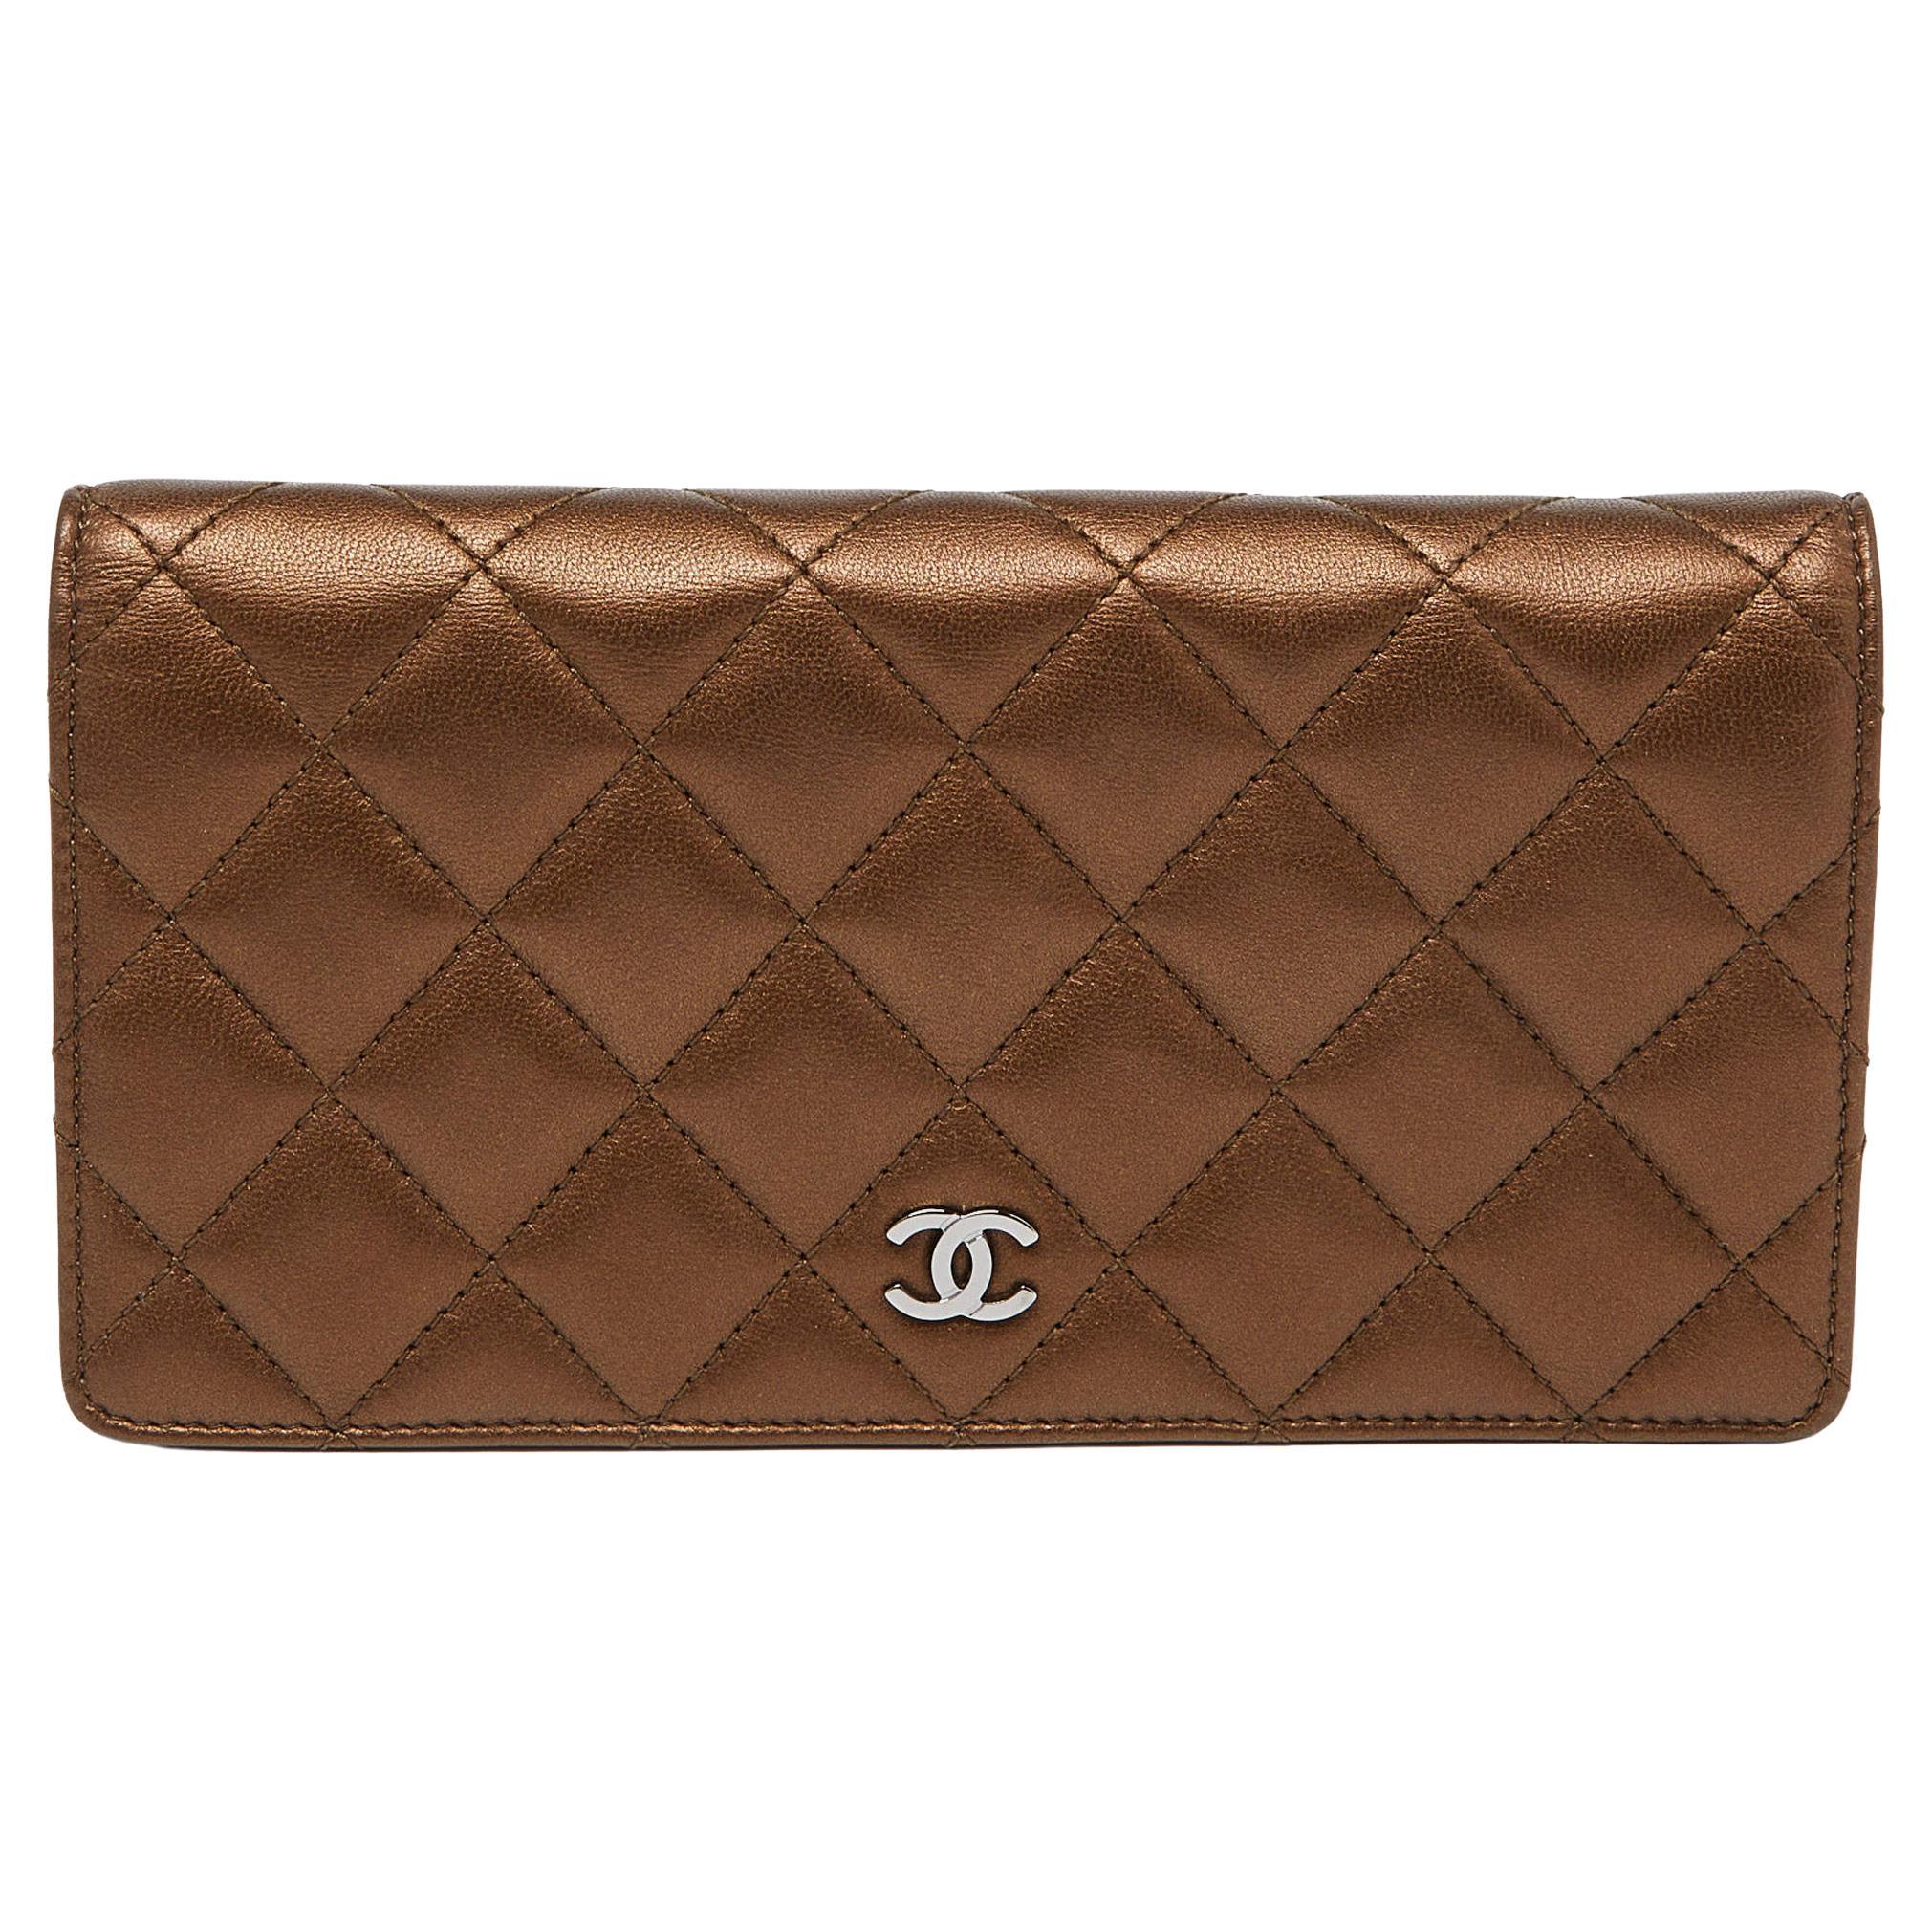 Chanel Metallic Brown Quilted Leather L Yen Wallet